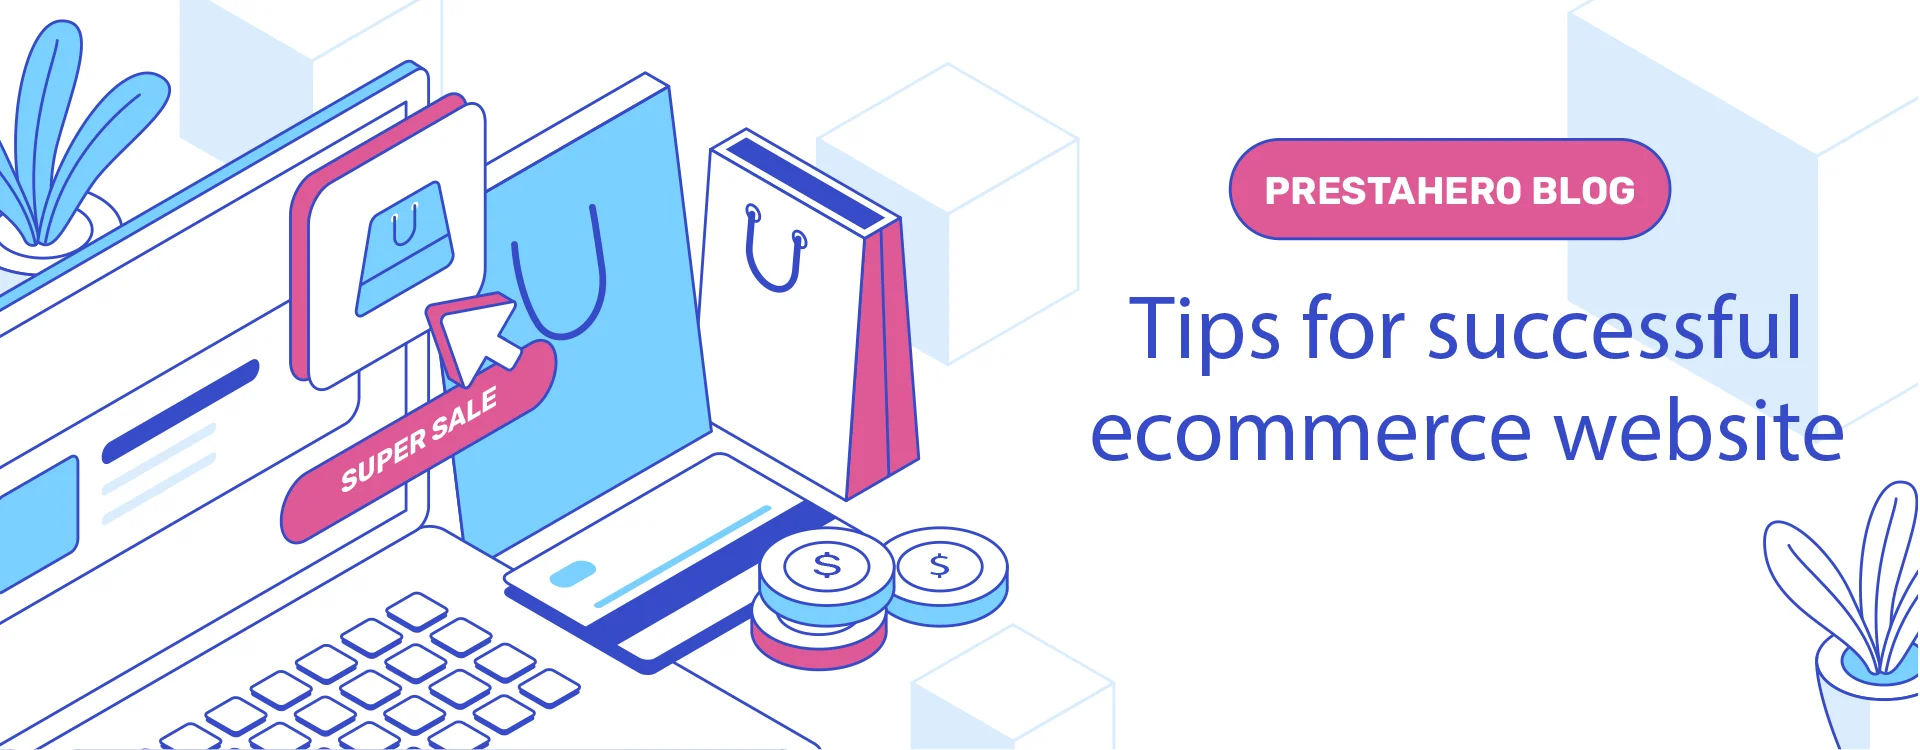 Tips for successful e-commerce website